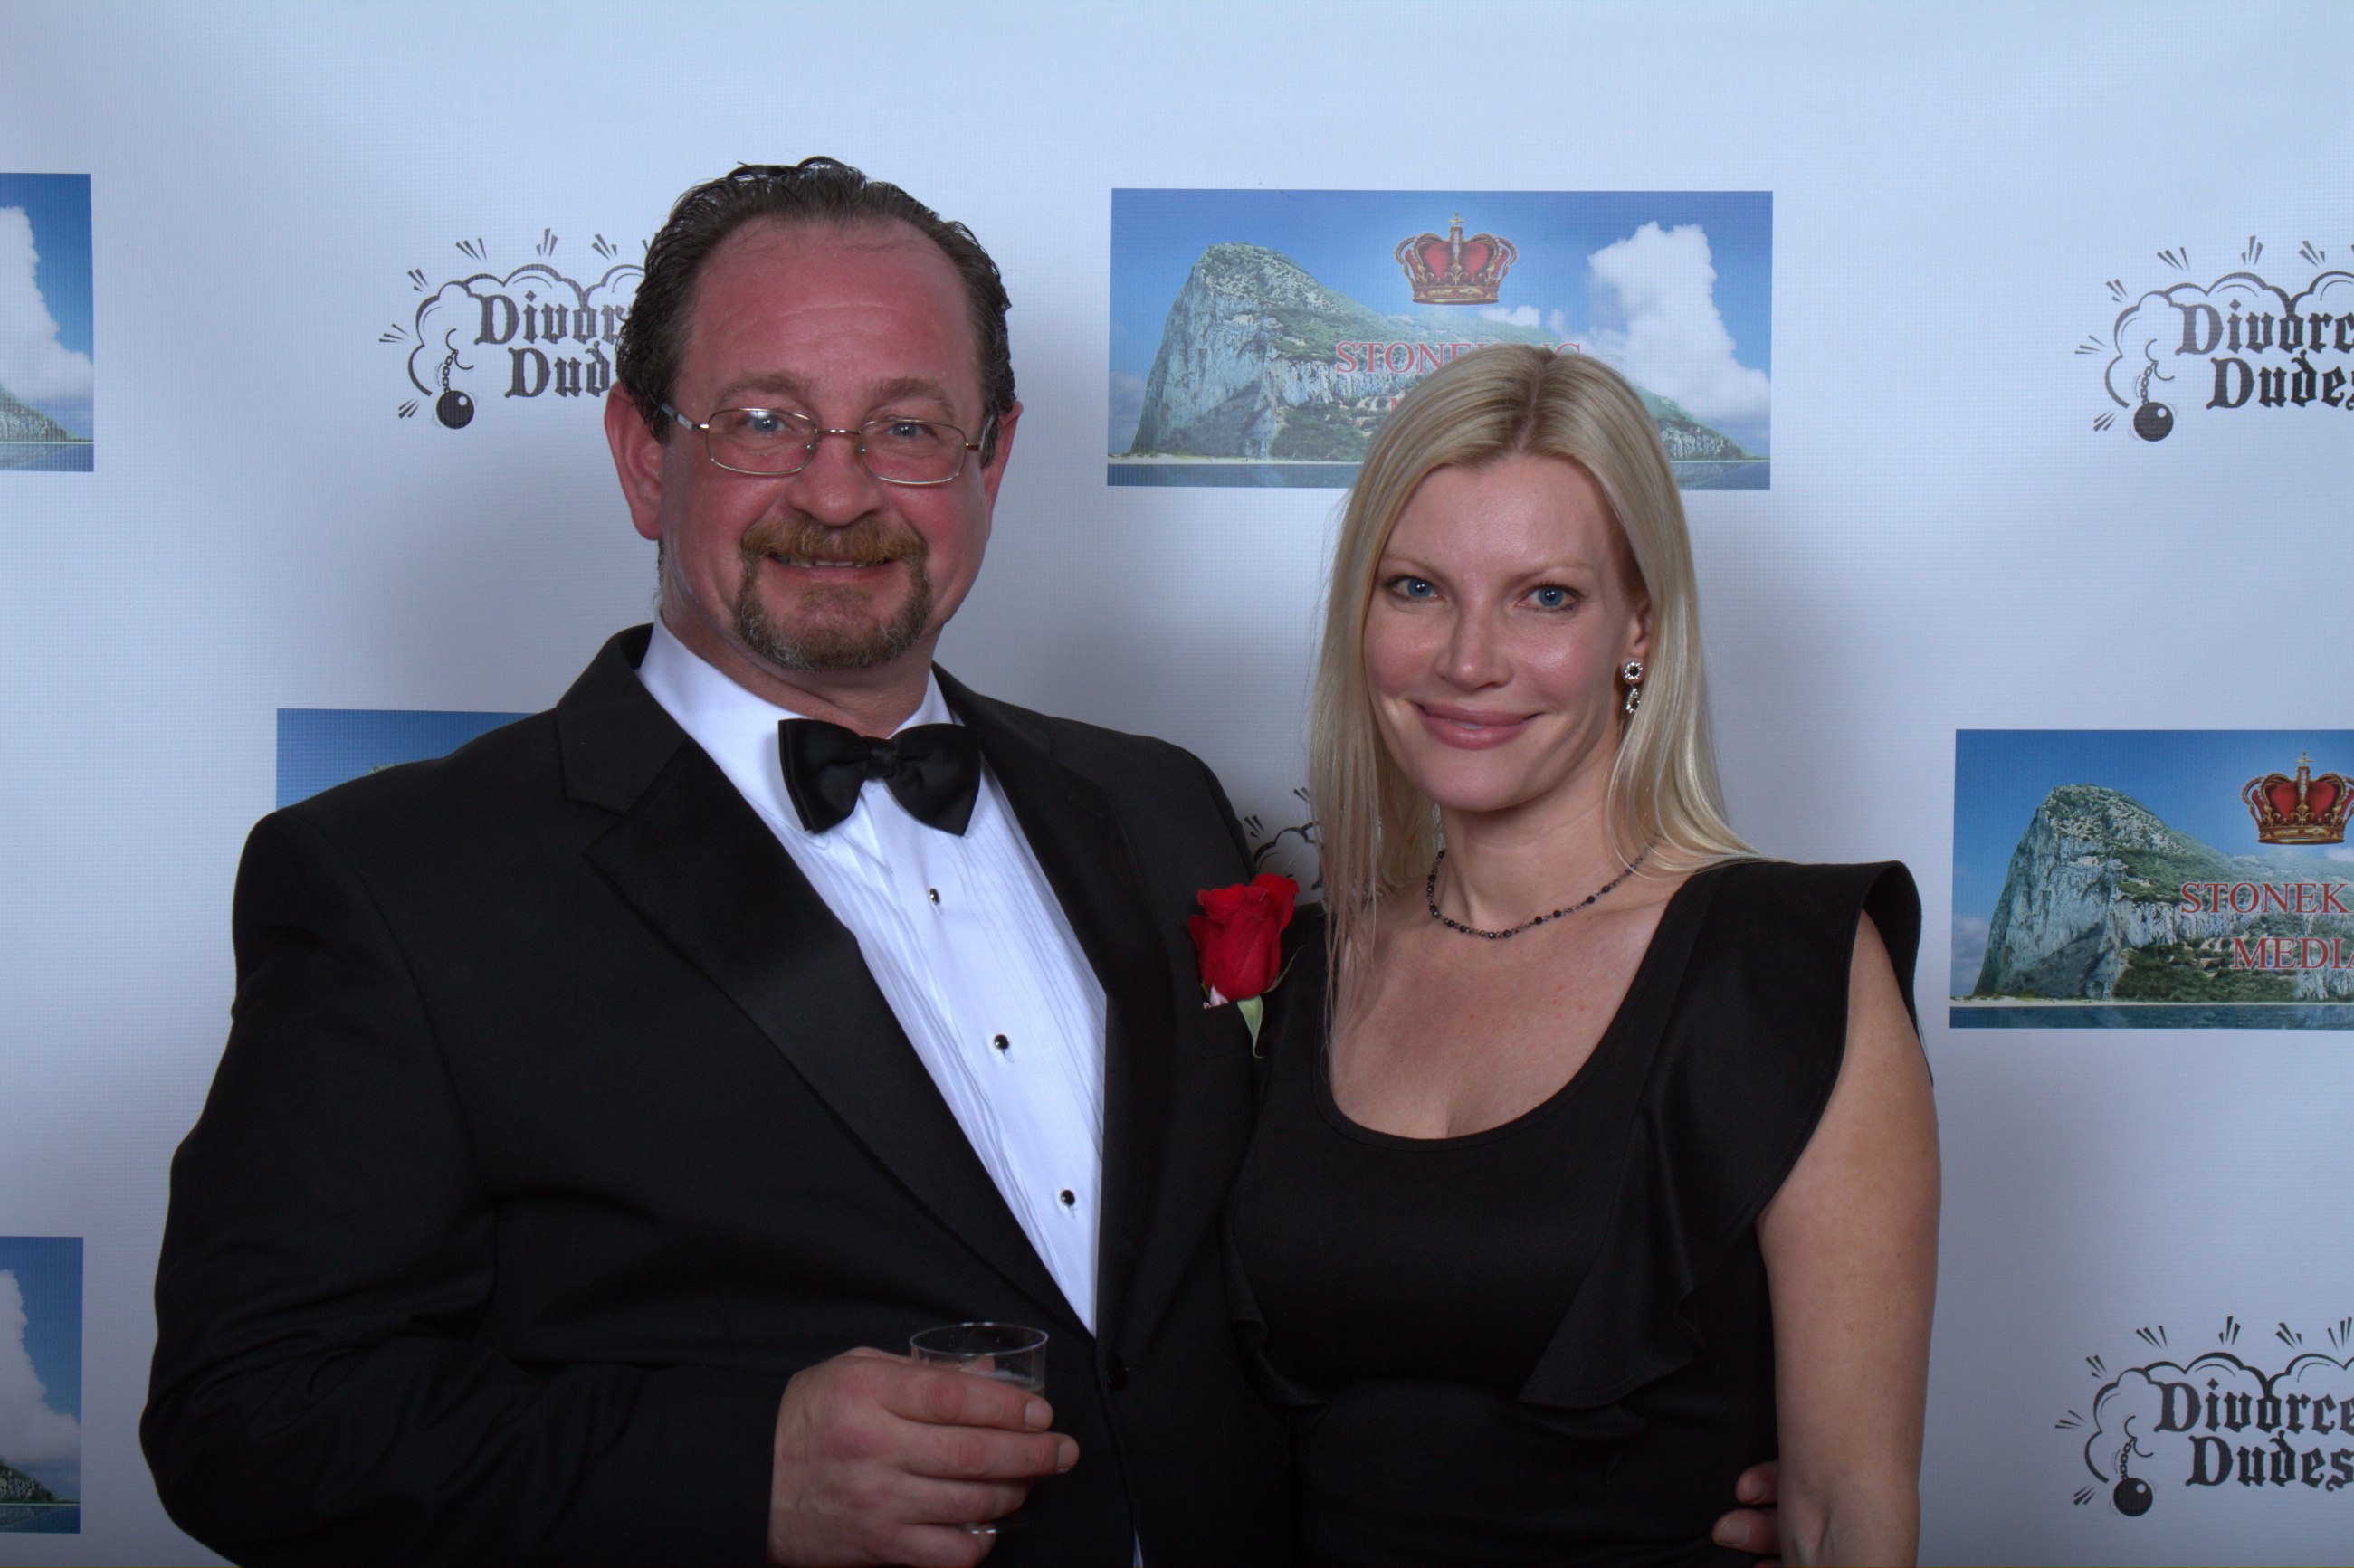 Bill Stoneking (Tom Sikes) and Renee Domenz (Annie Sikes) at the Divorced Dudes Chicago World Premiere and Red Carpet Event, October 19th, 2012.